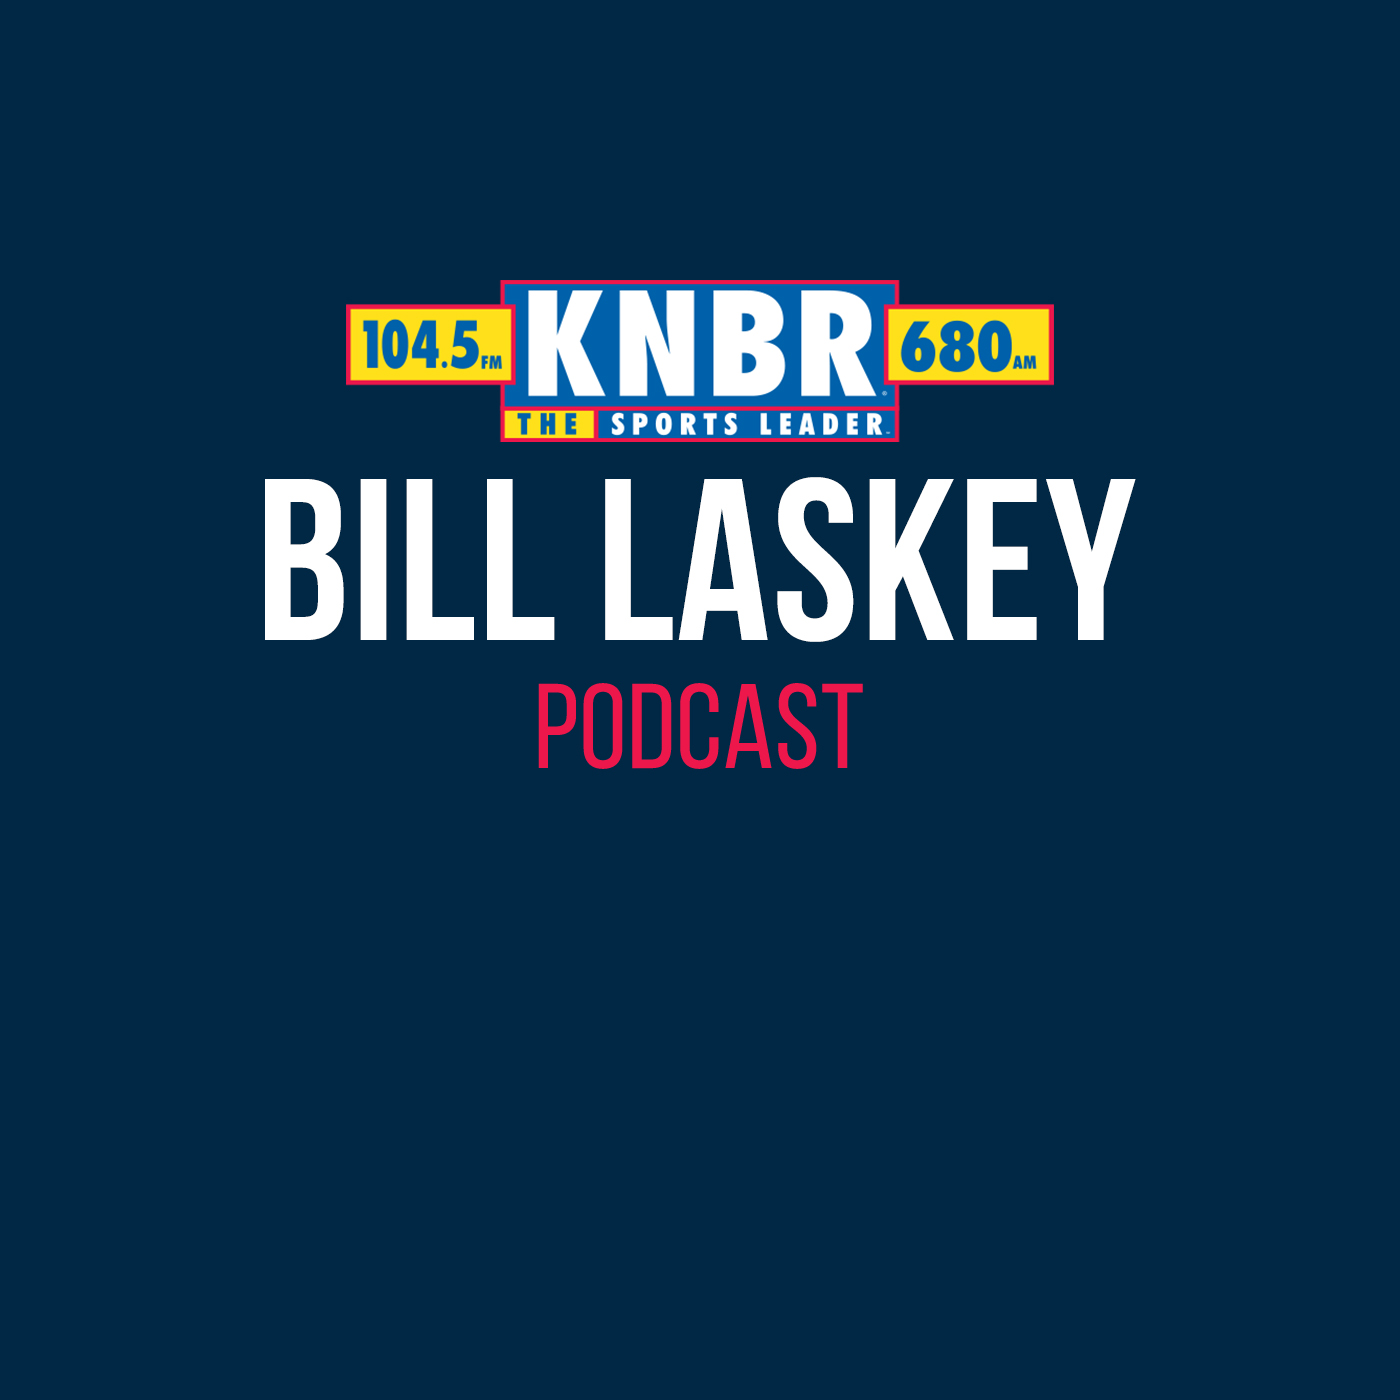 9-3 Kerry Crowley joins Extra Innings with Bill Laskey to recap the Giants vs Padres series and to get his perspective on a few headlines around MLB